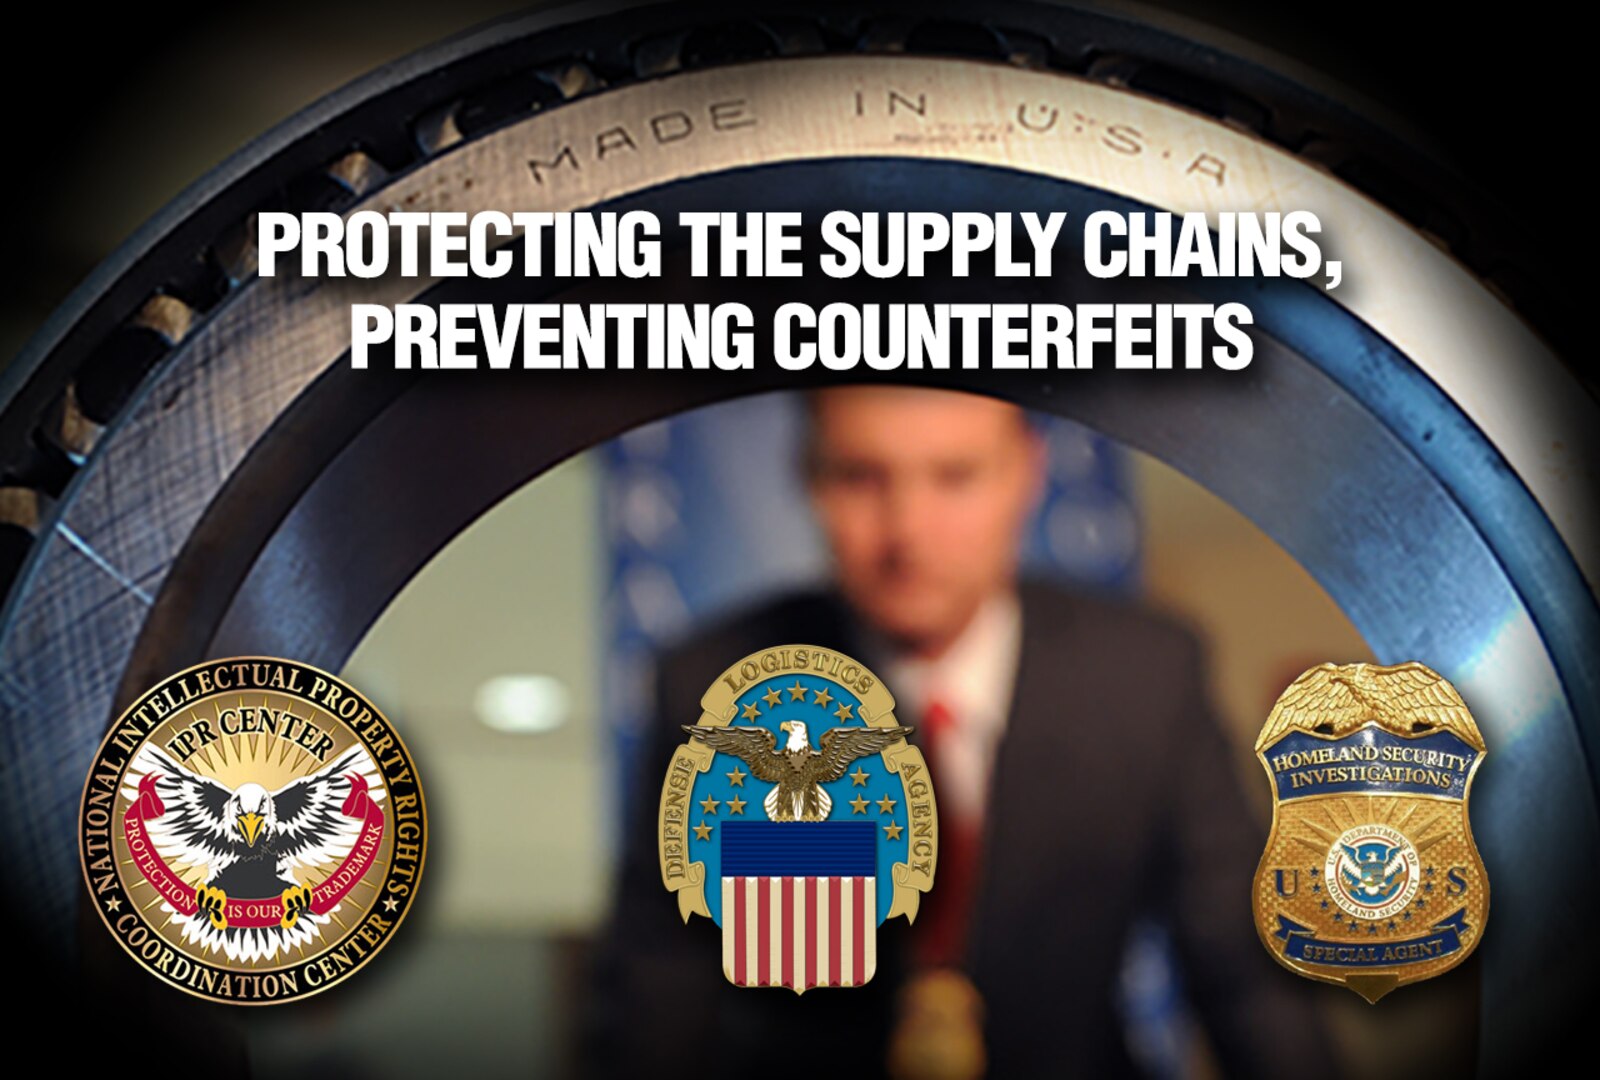 DLA is working with partners at DHS to stop counterfeiters.